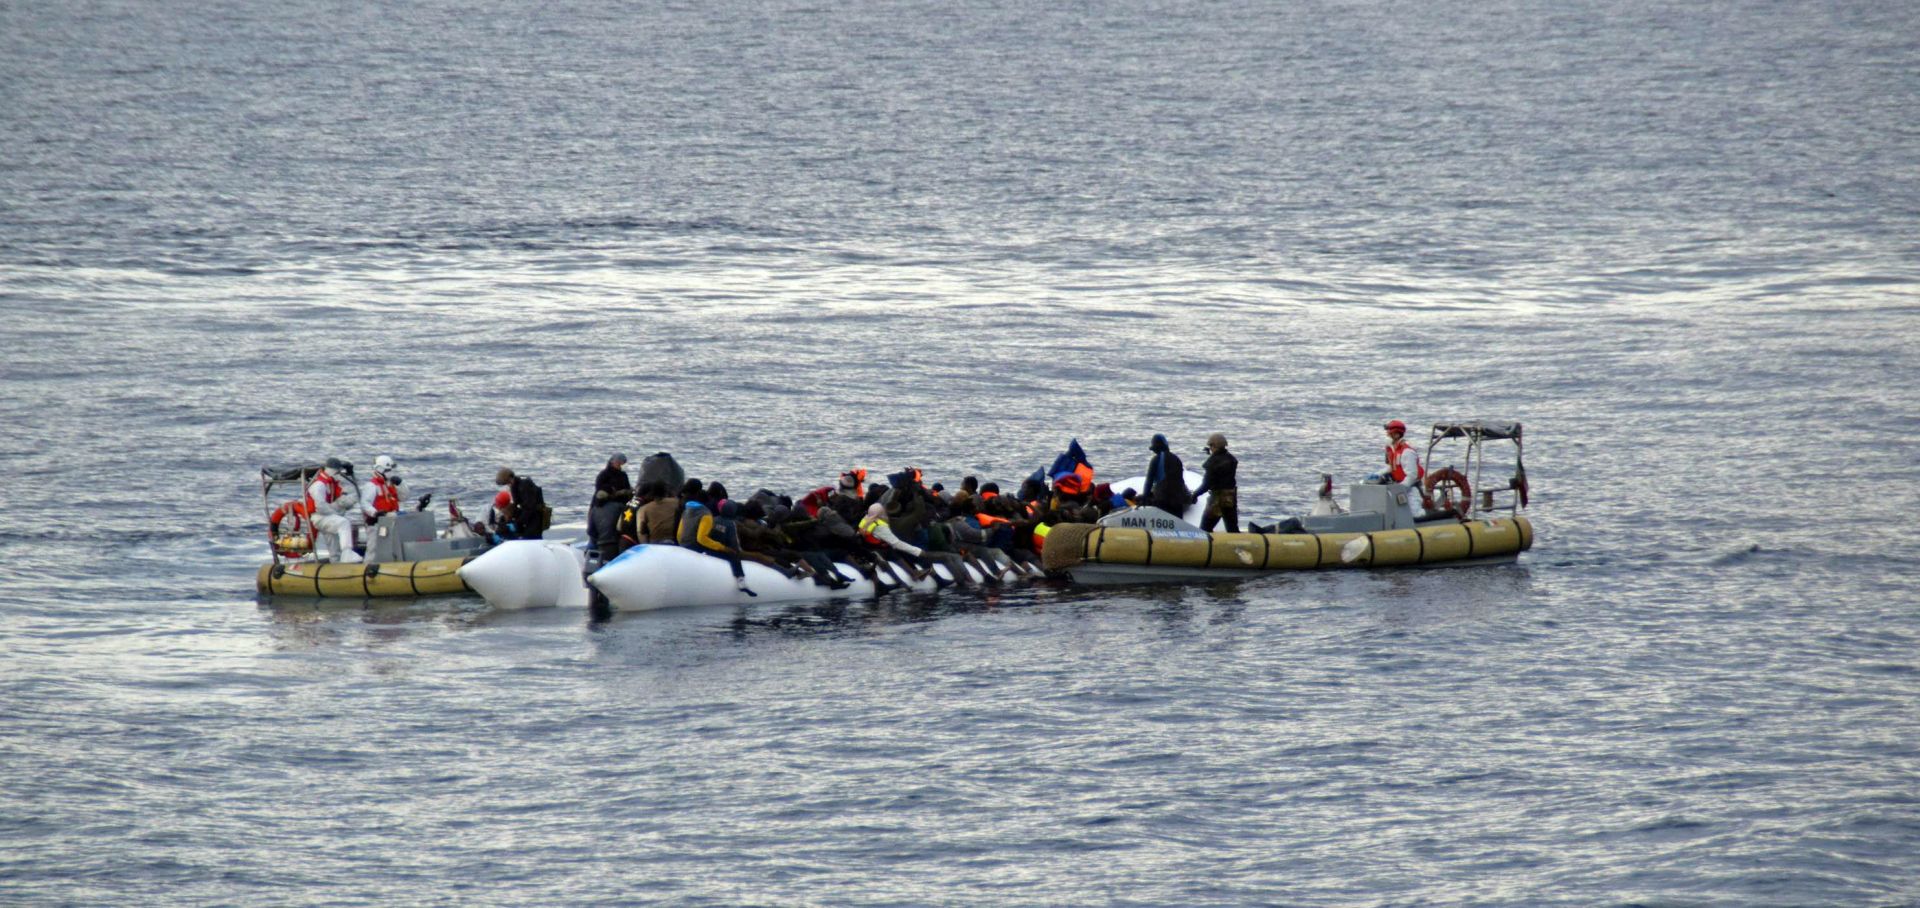 epa05176575 An undated handout image provided by the Italian Navy on 23 February 2016 showing migrants on a boat during rescue operations in the Strait of Sicily off the Italian coast. Italian Navy ships rescued almost 600 migrants from distress during the weekend of 20 and 21 February.  EPA/ITALIAN NAVY / HANDOUT BEST QUALITY AVAILABLE HANDOUT EDITORIAL USE ONLY/NO SALES